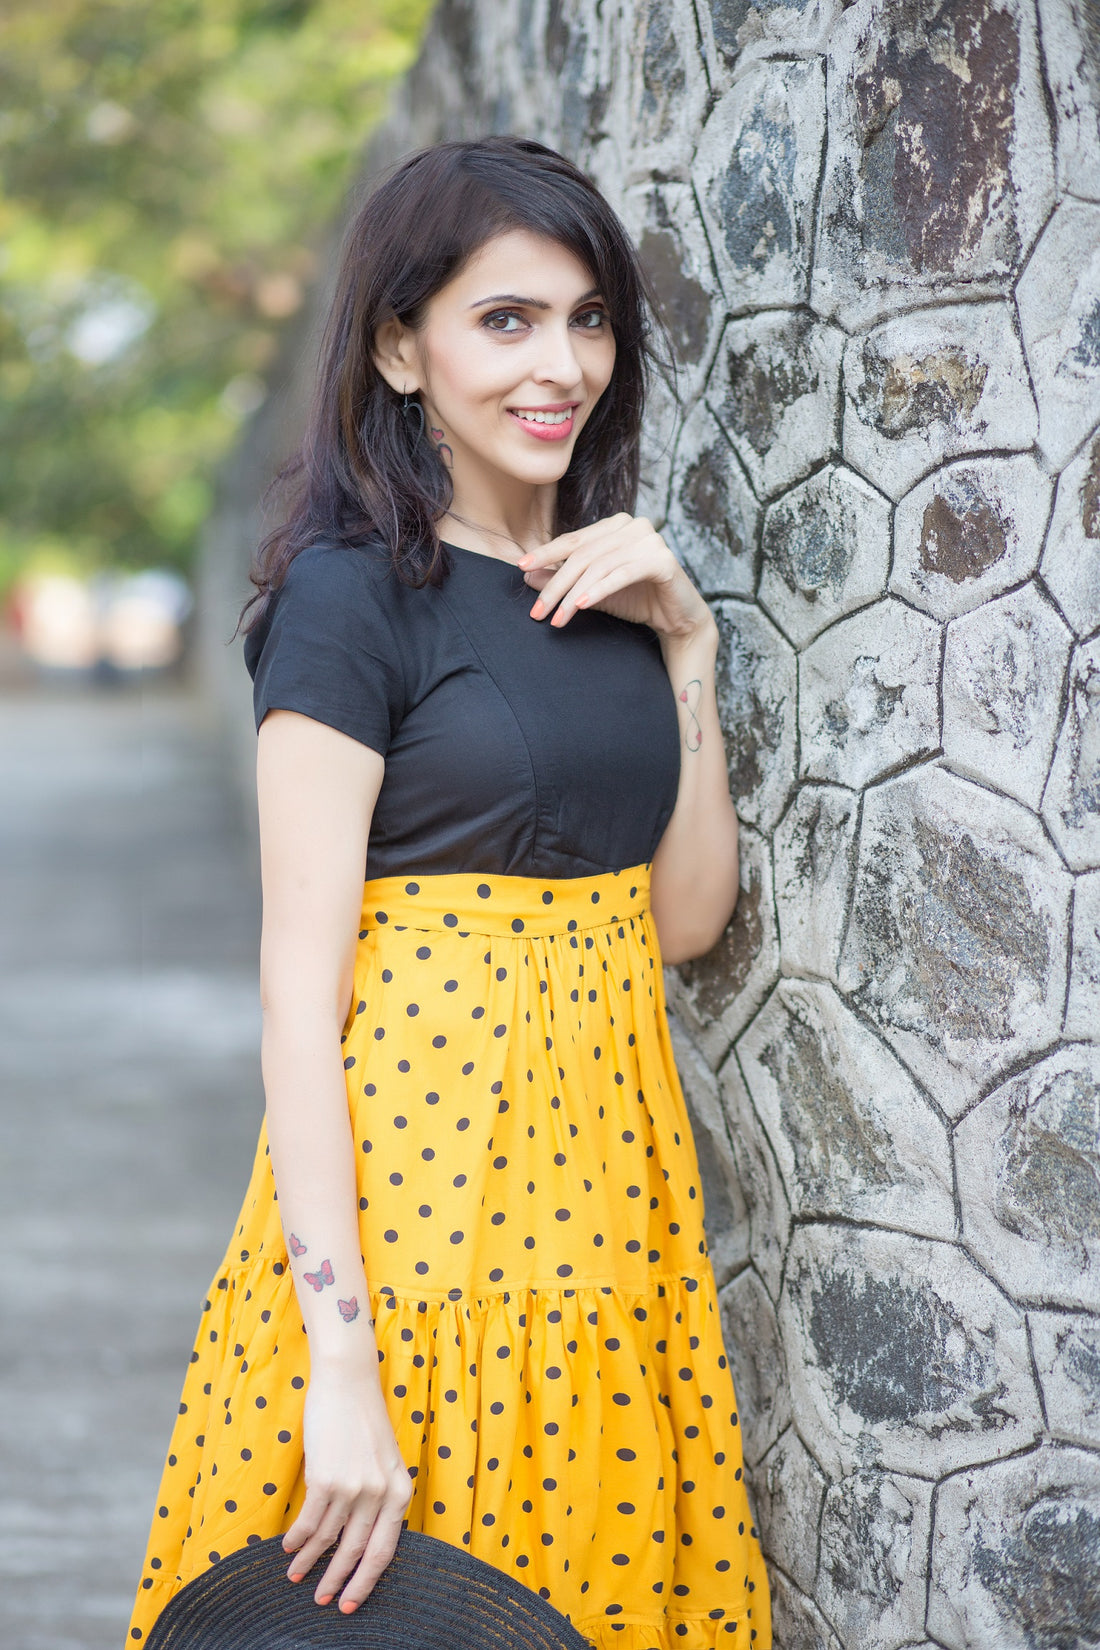 BUMBLE BEE FROCK